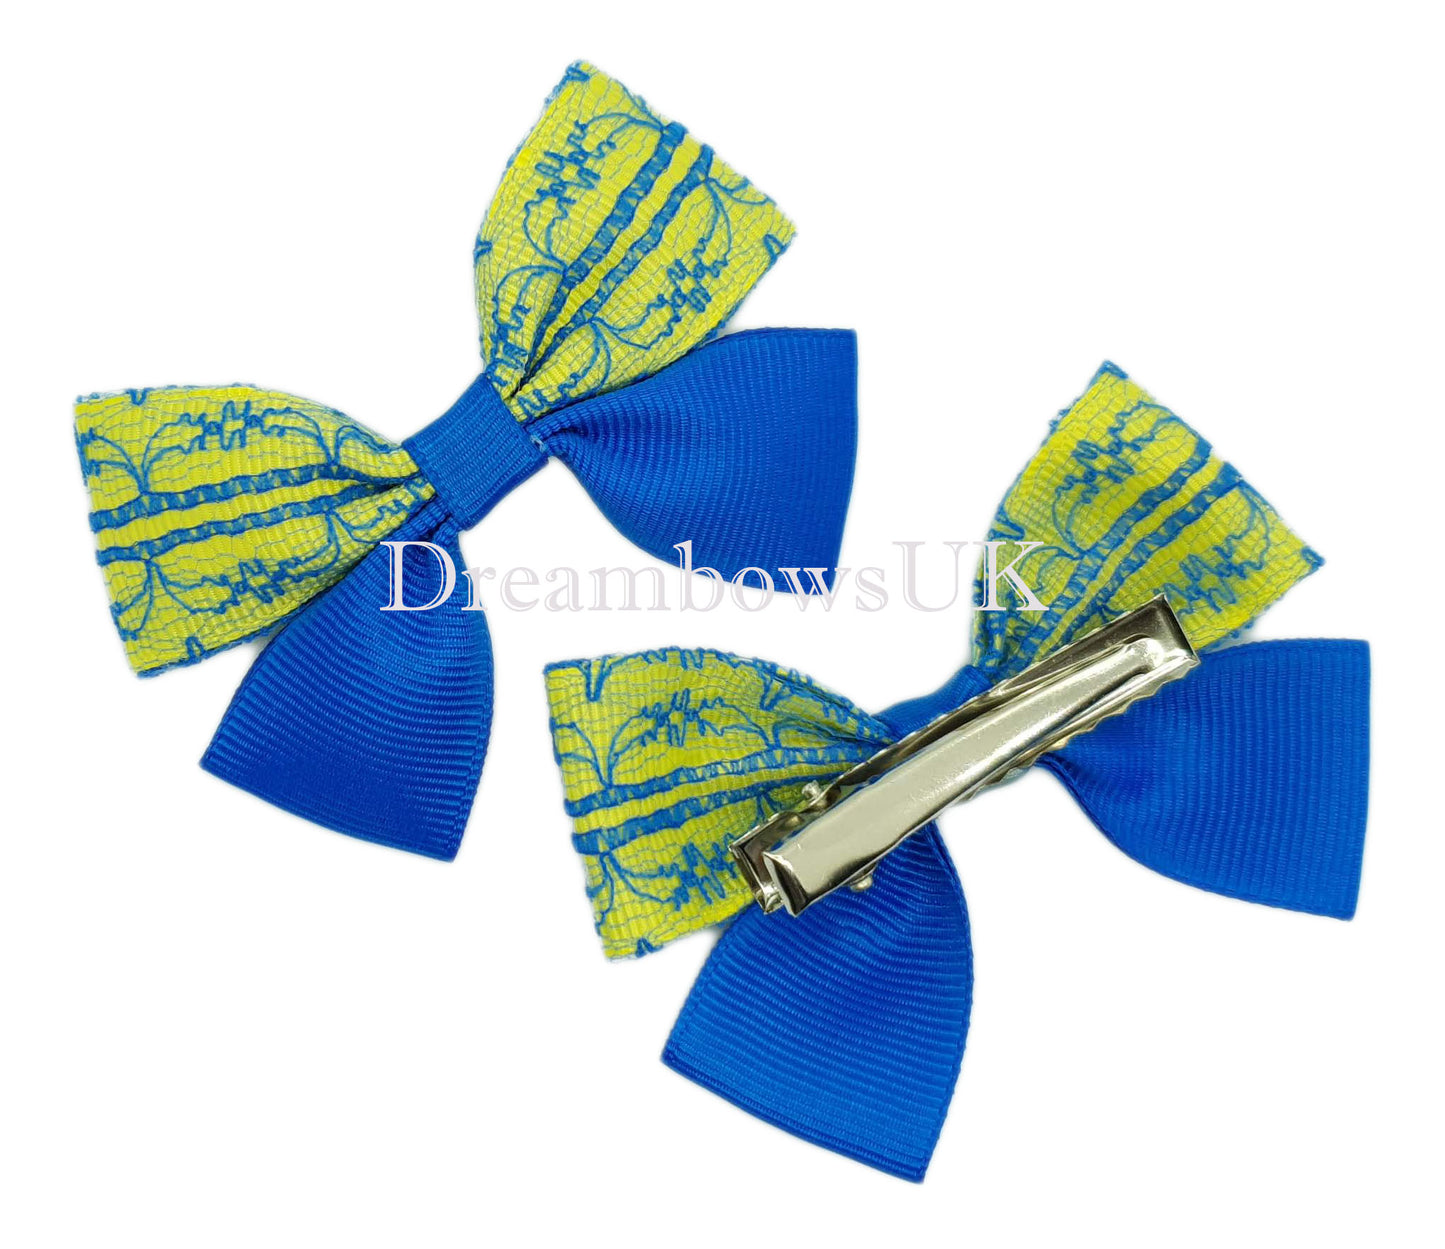 Royal blue and yellow school bows on alligator clips